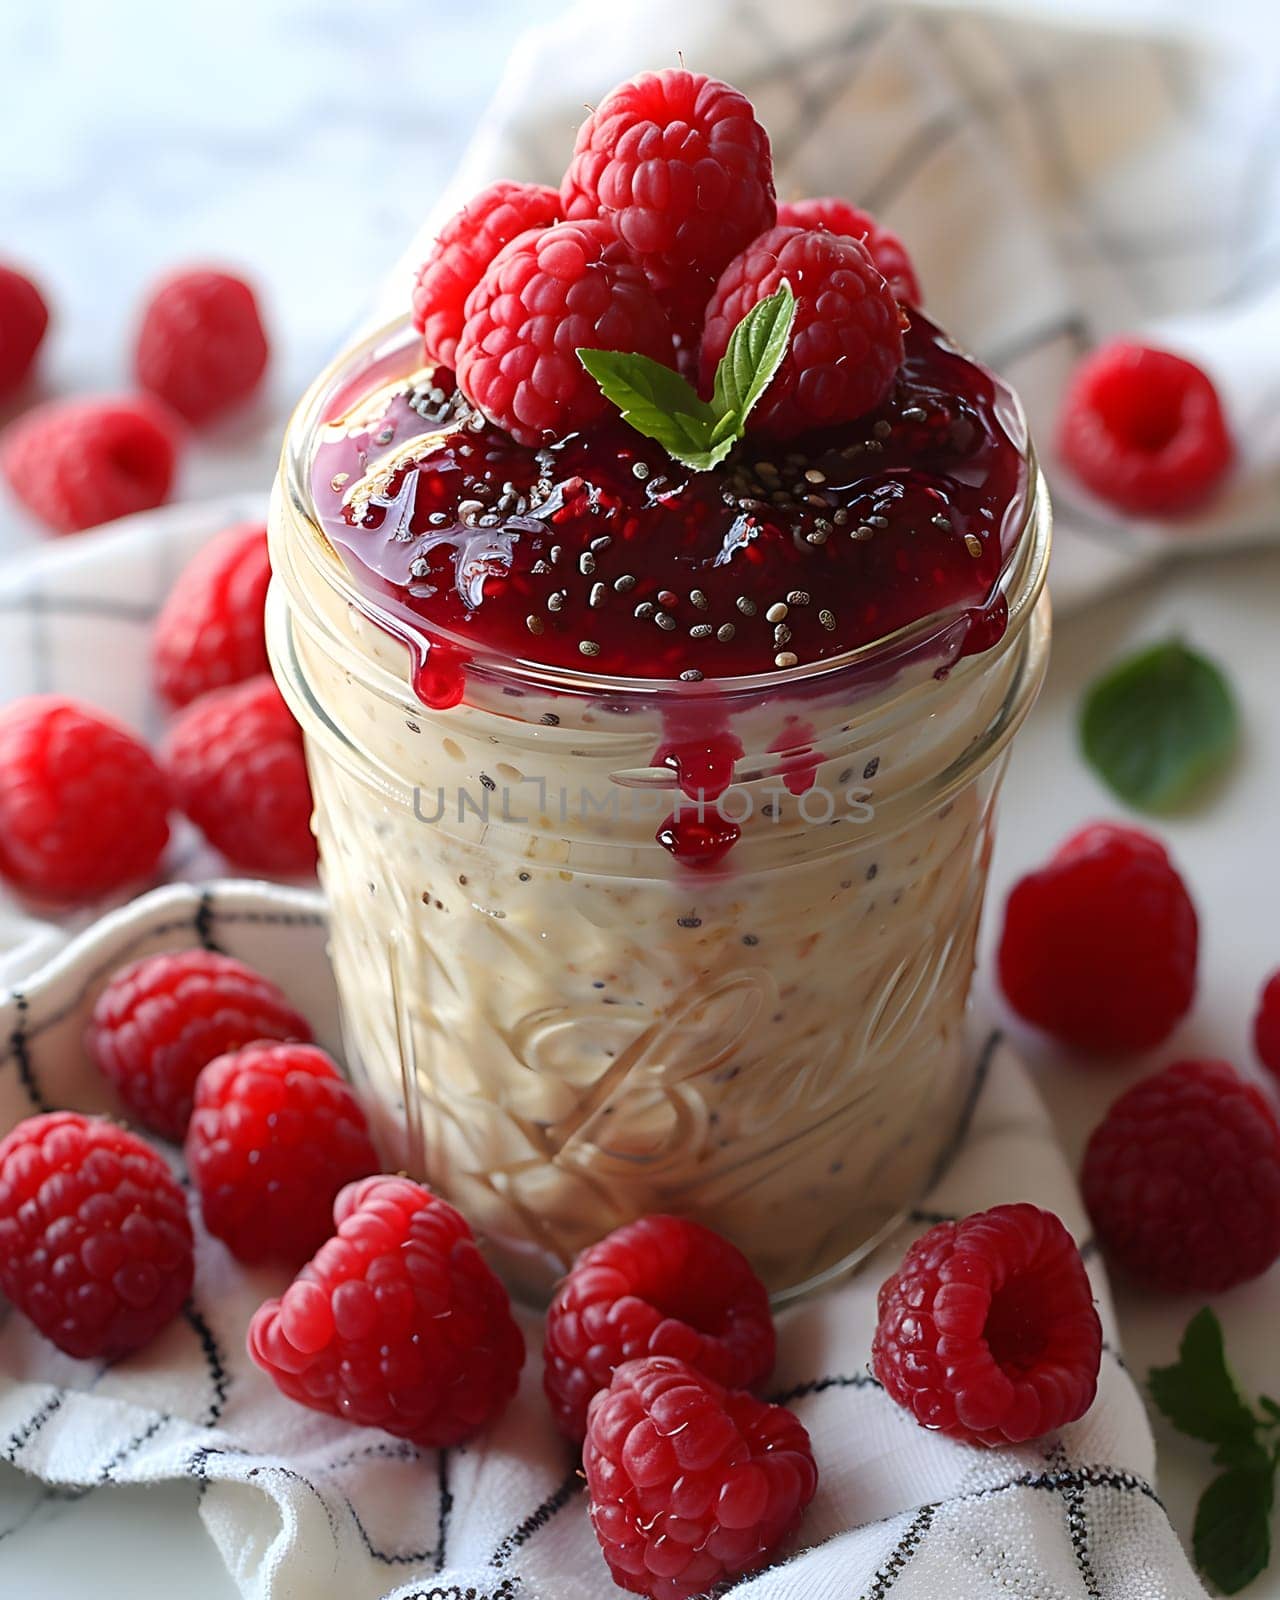 A nutritious jar of overnight oats featuring raspberries as a topping. This dish is a delicious blend of natural foods and ingredients, perfect for a healthy breakfast option